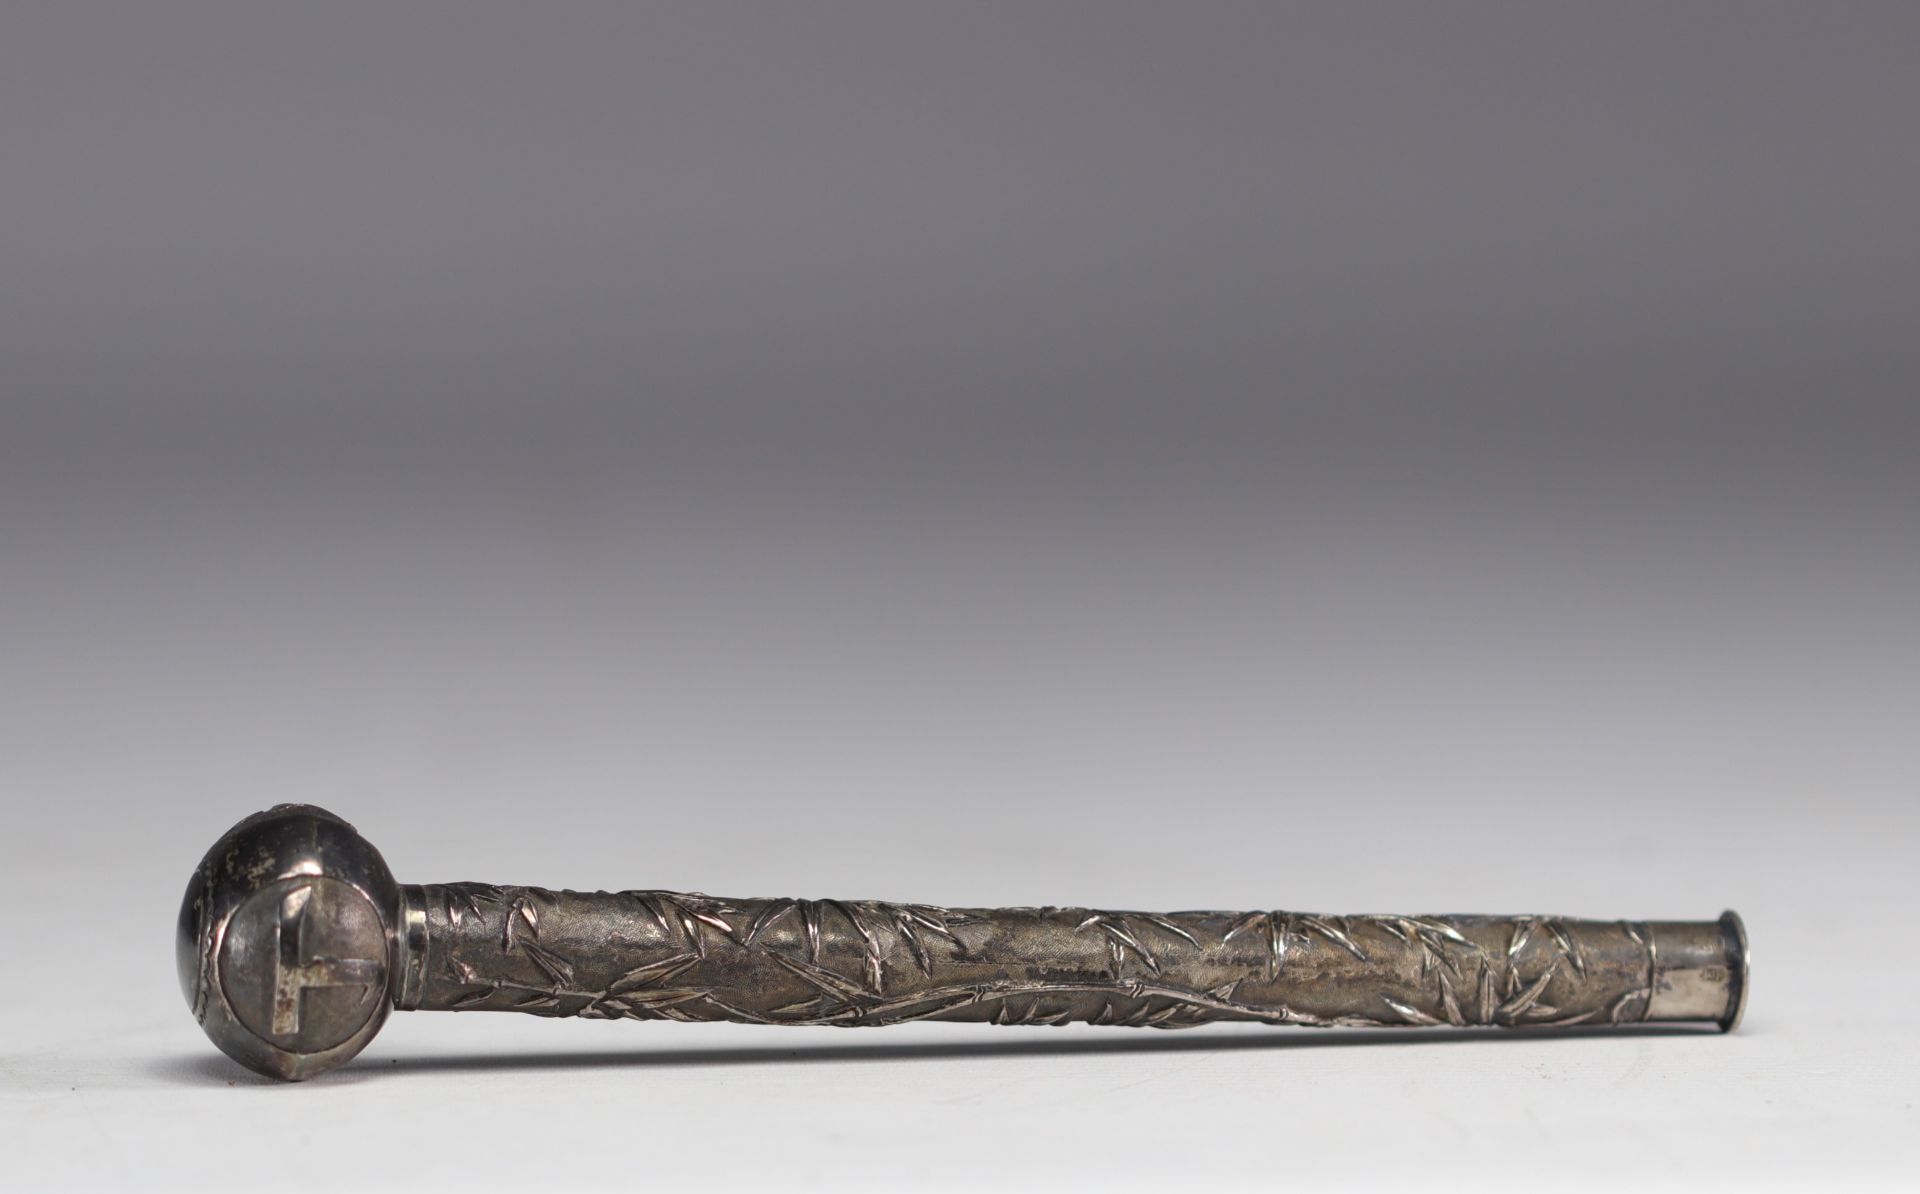 China - Silver parasol handle with bamboo decoration.